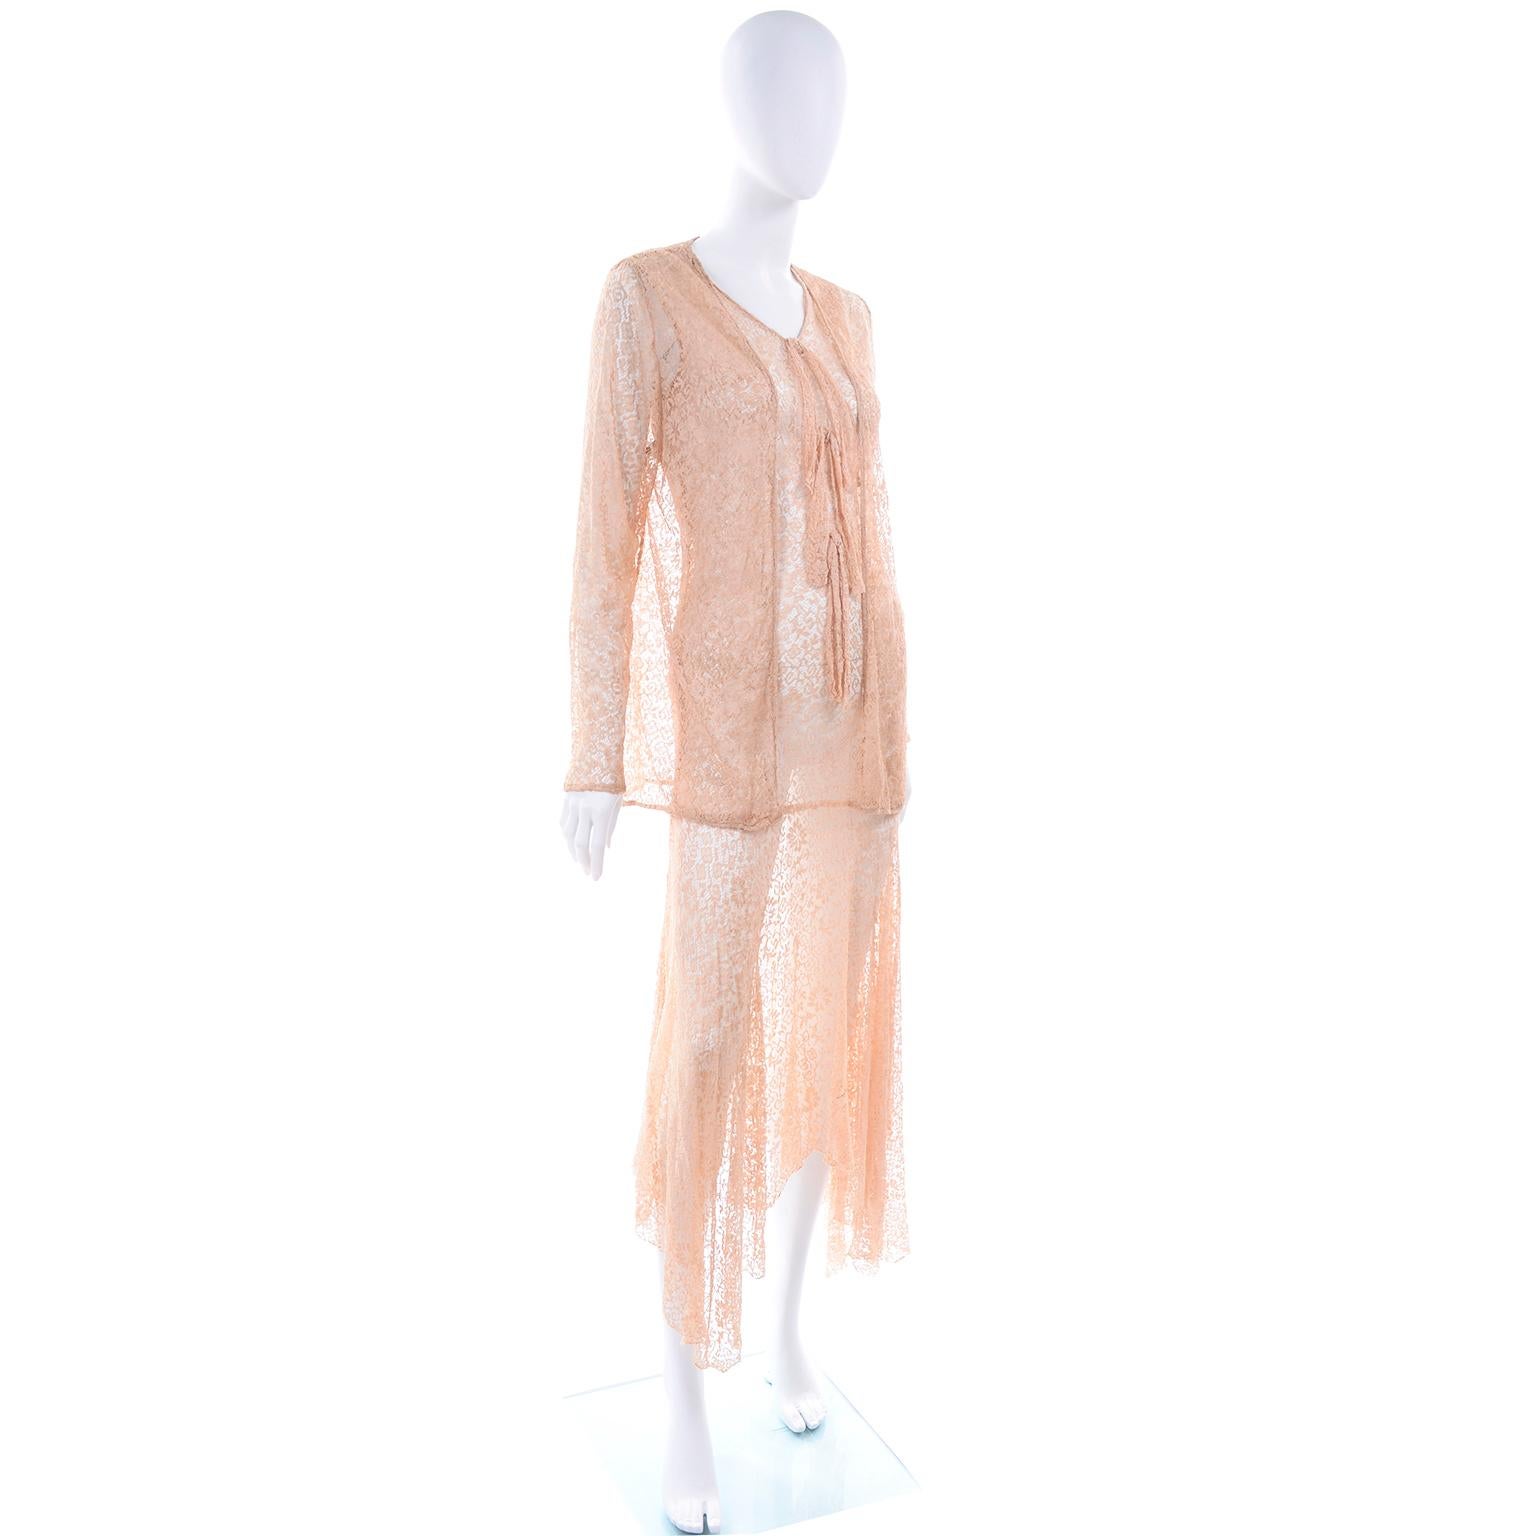 1930s Tan Peach Stretch Lace Dress With Bows and Matching Jacket 1